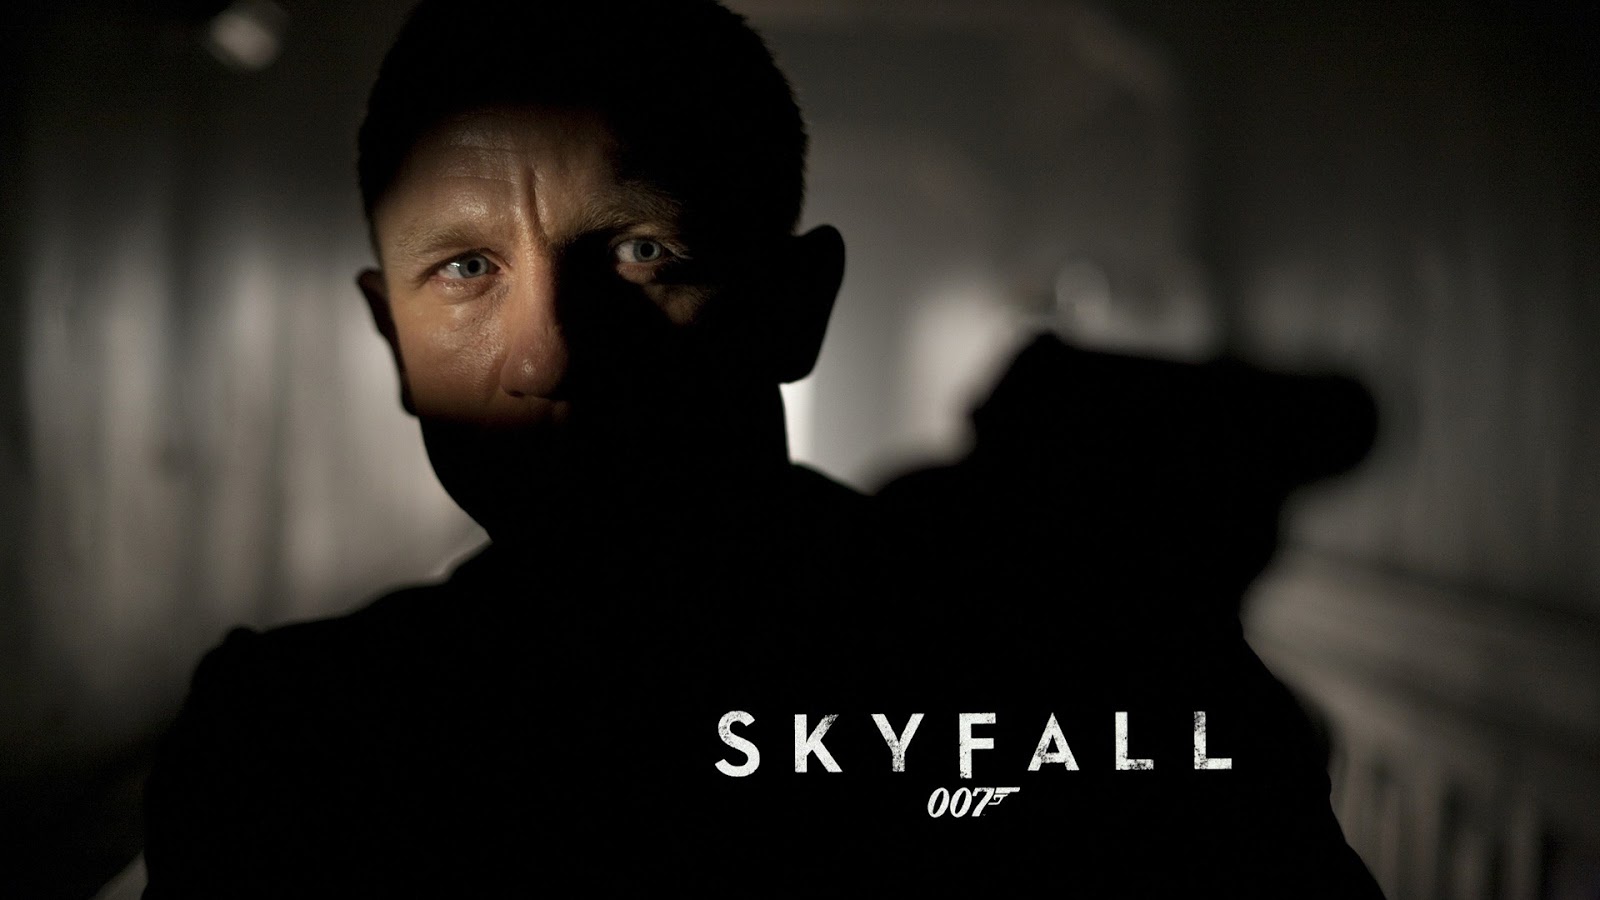 Free Download James Bond 007 Movie Skyfall HD Wallpapers for iPad 3 and iPad mini ...